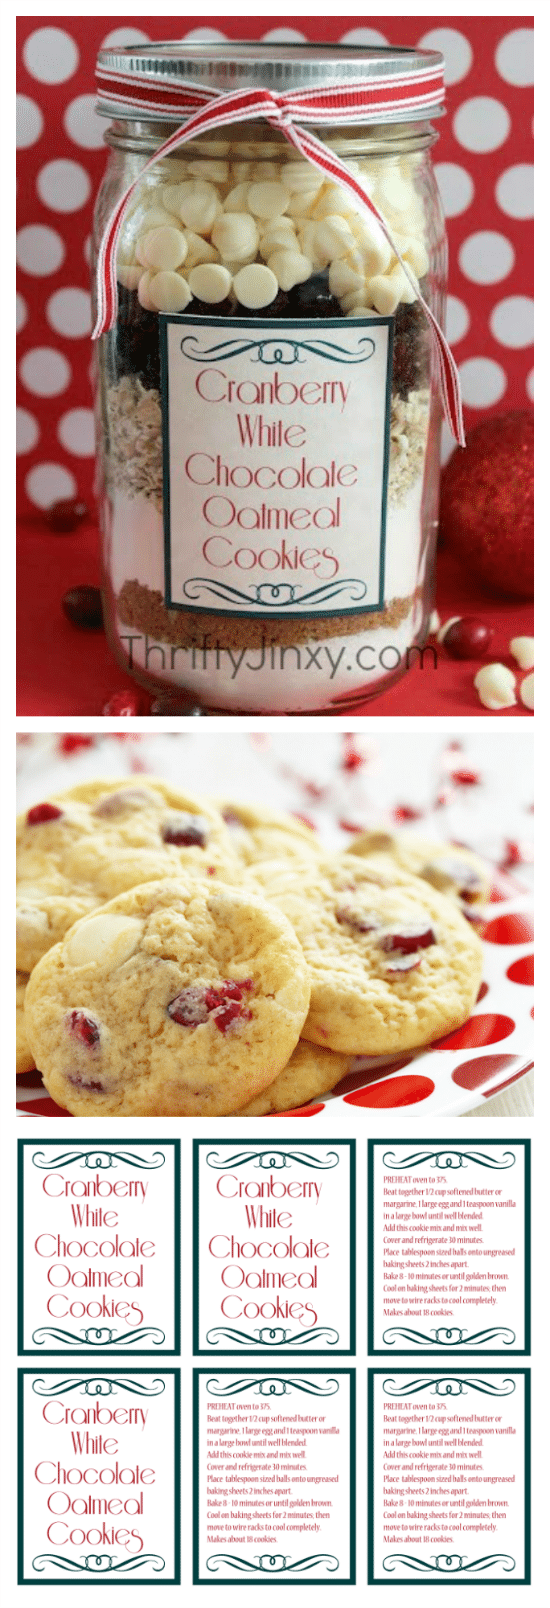 Cranberry White Chocolate Oatmeal Cookie in a Jar Recipe with FREE Printable Labels - A fun gift idea!